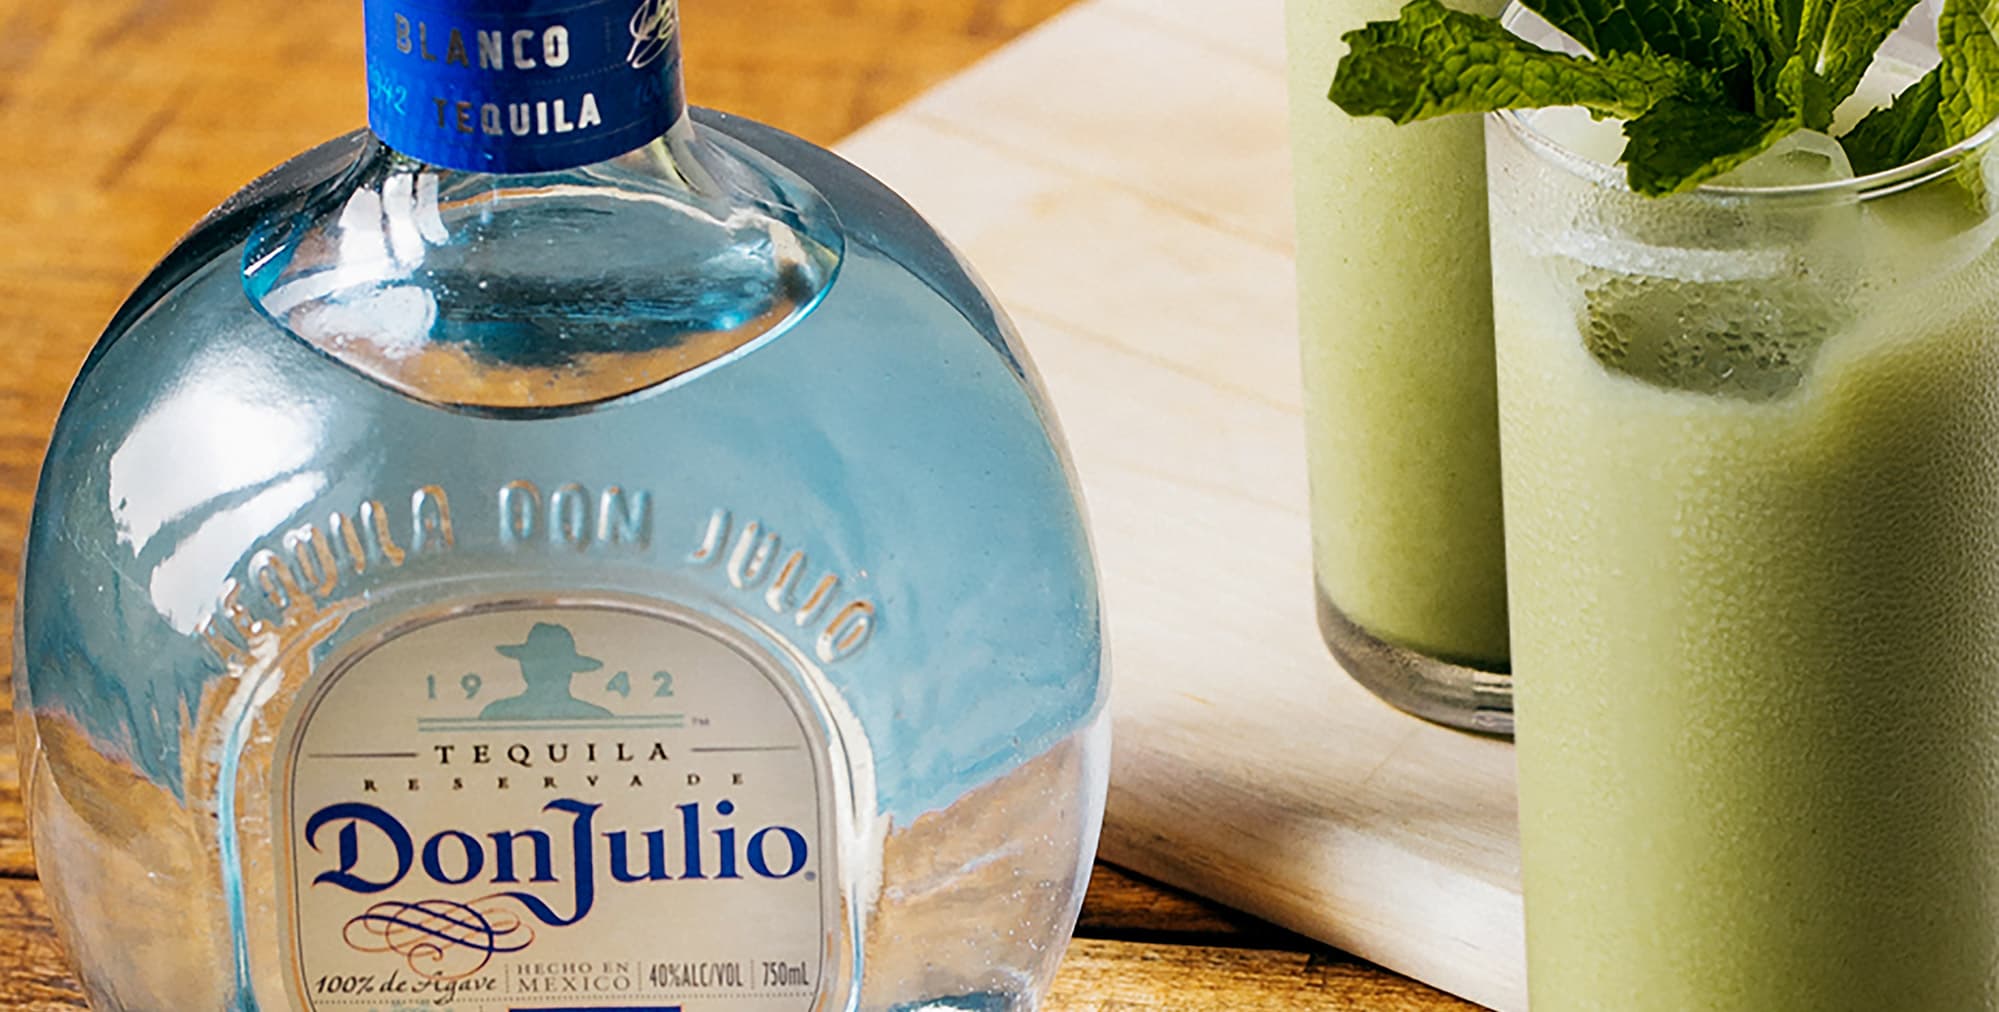 Matcha Green Tea Cocktail made with Don Julio Blanco Tequila